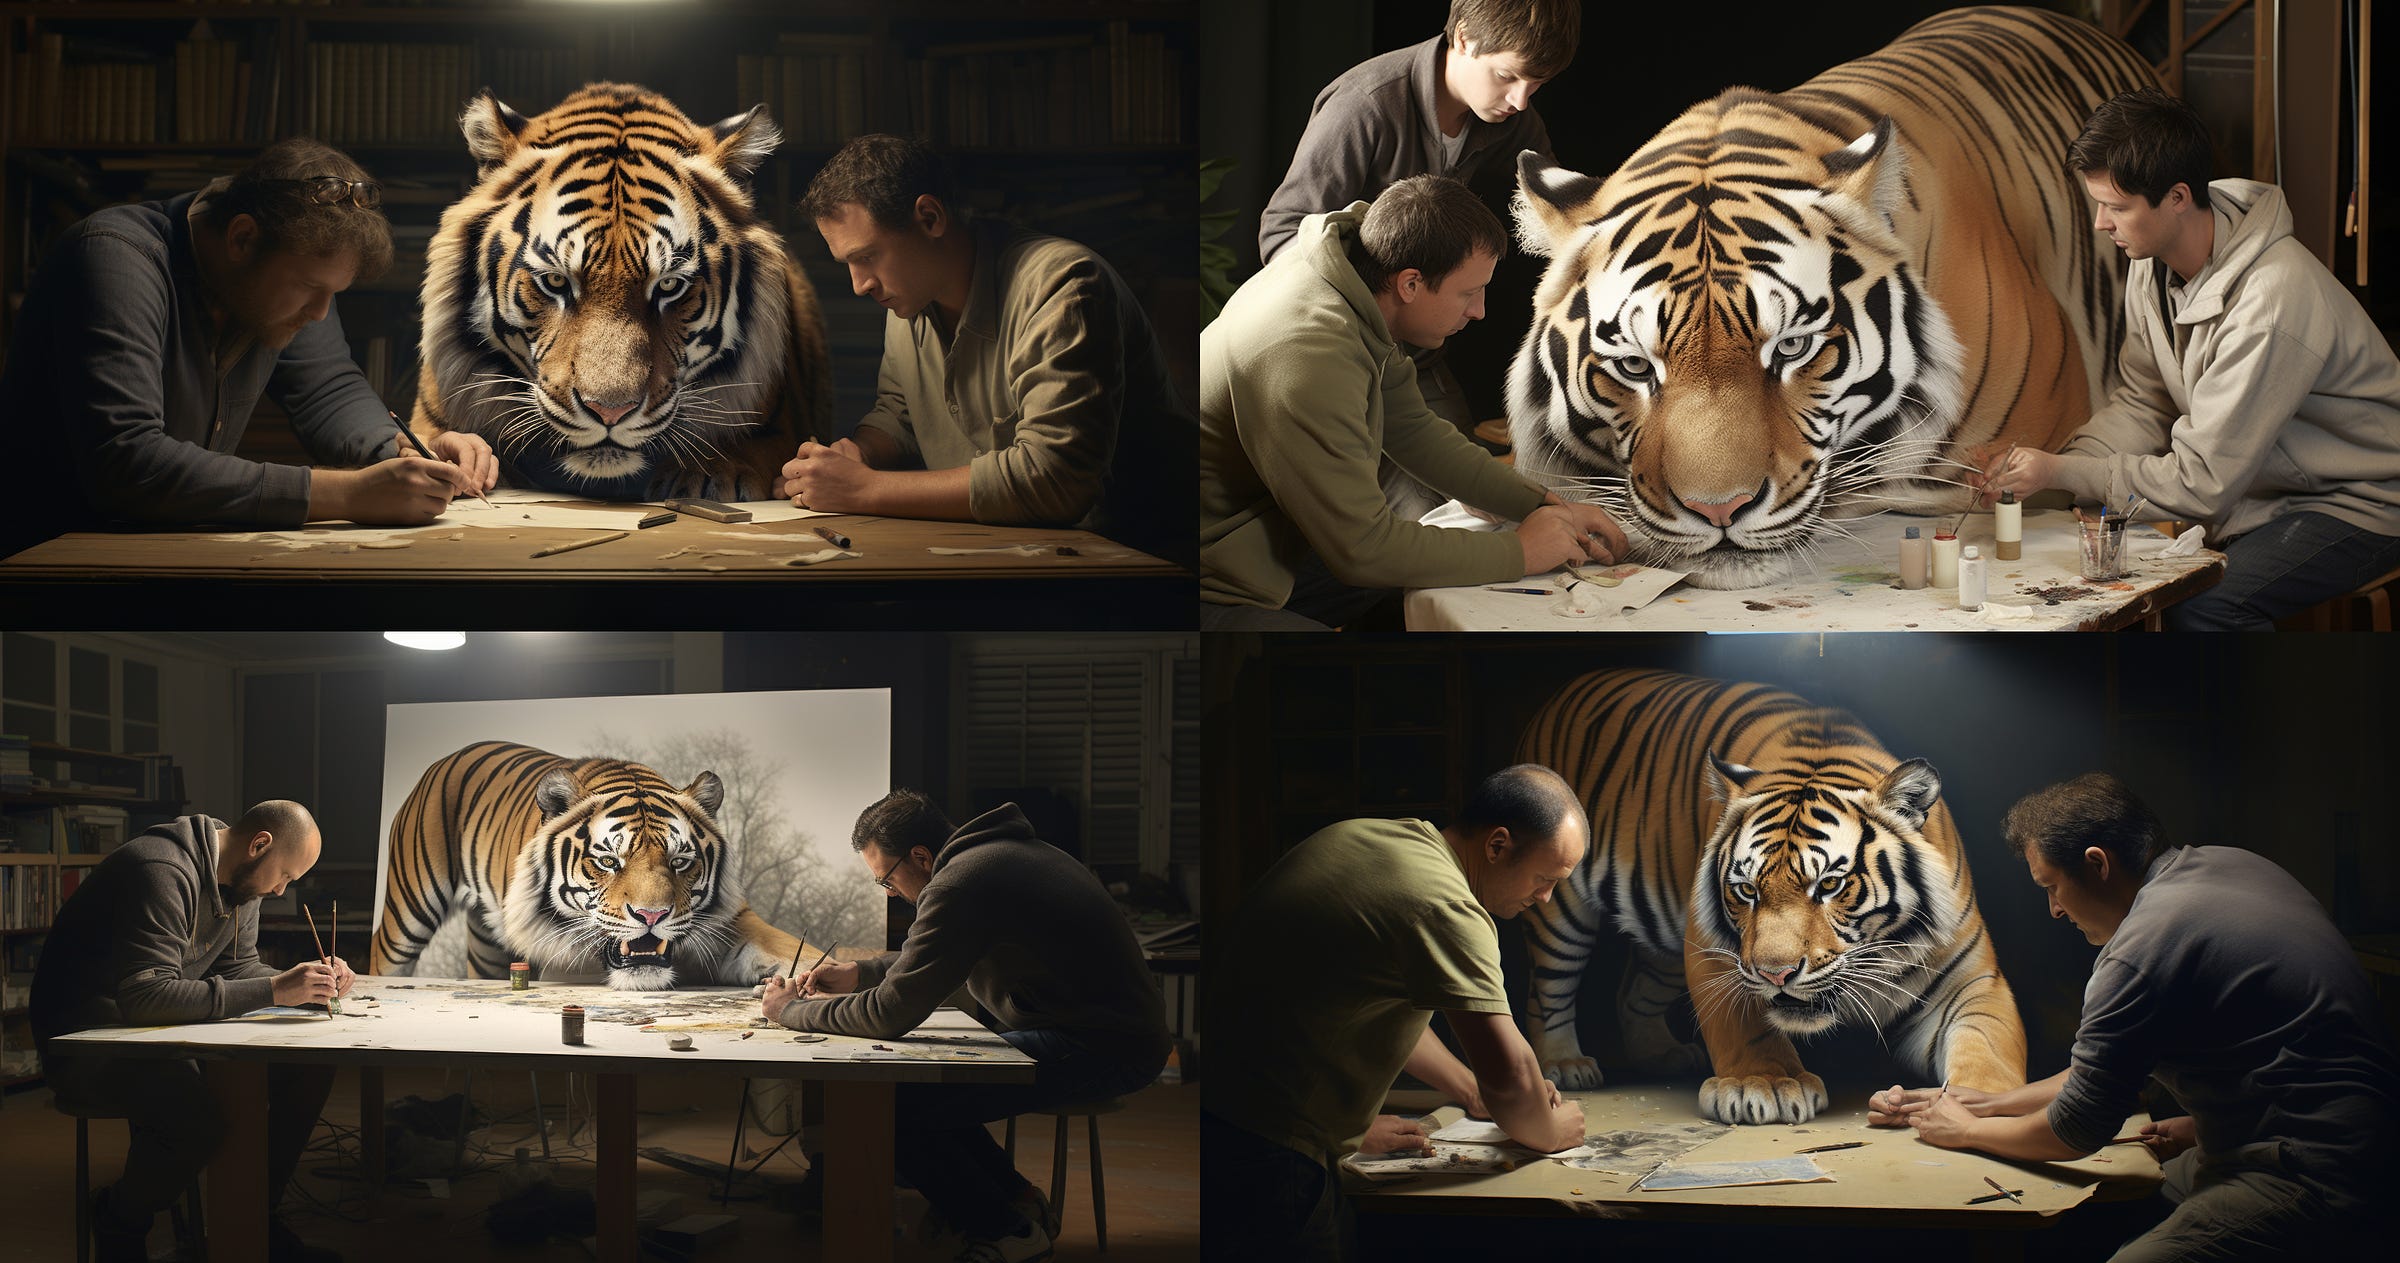 Four variations of "three men collaborating to create a drawing of a tiger" imagined by Midjourney